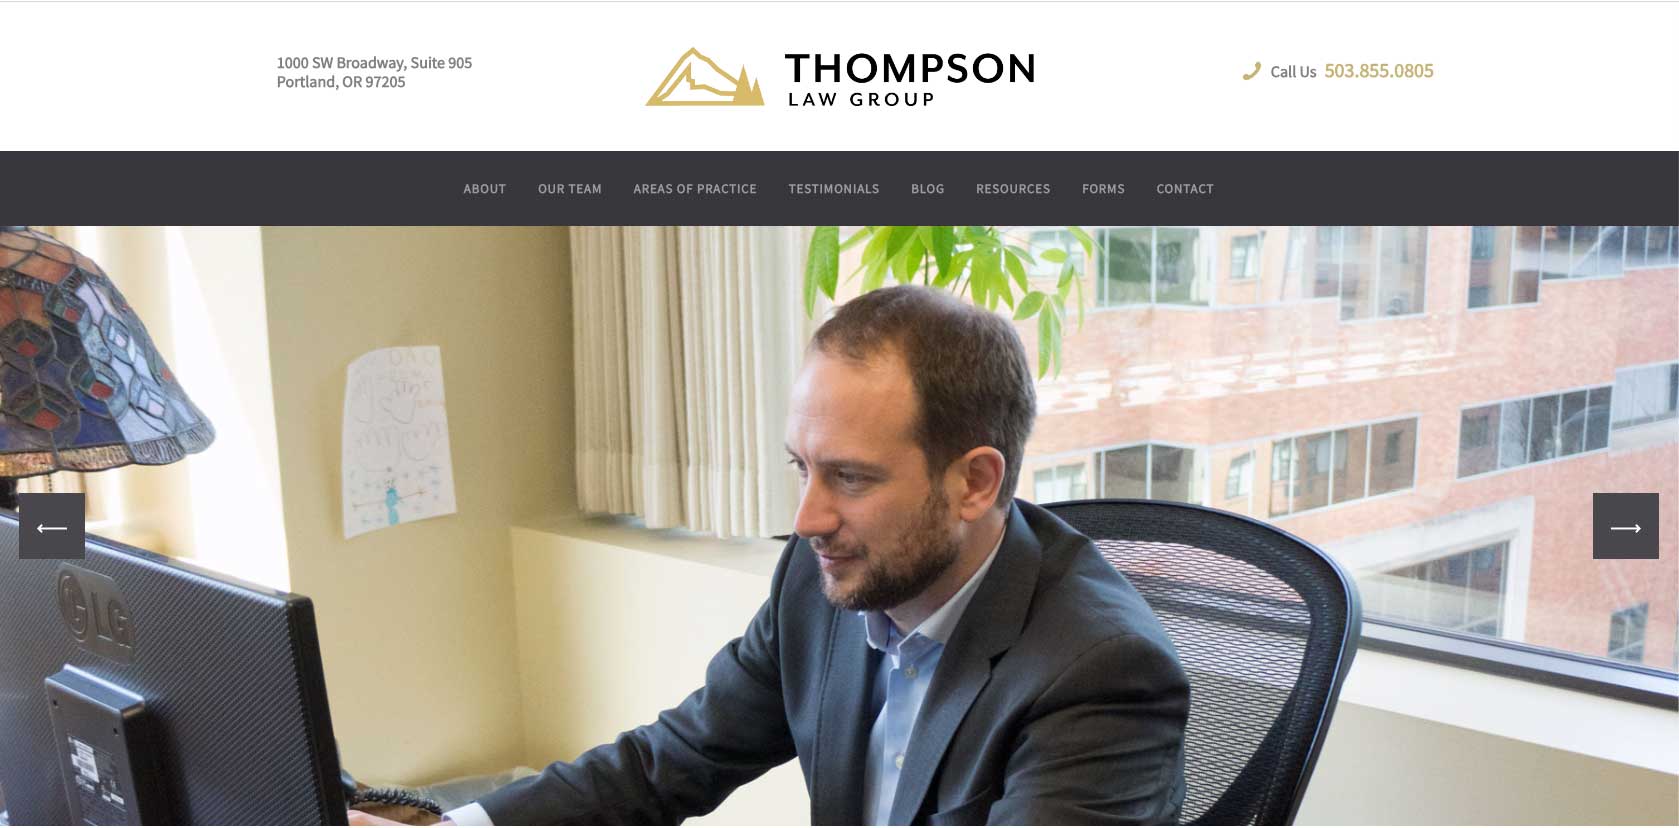 Homepage of the website we designed and built for Thompson Law Group, featuring a custom photograph we took